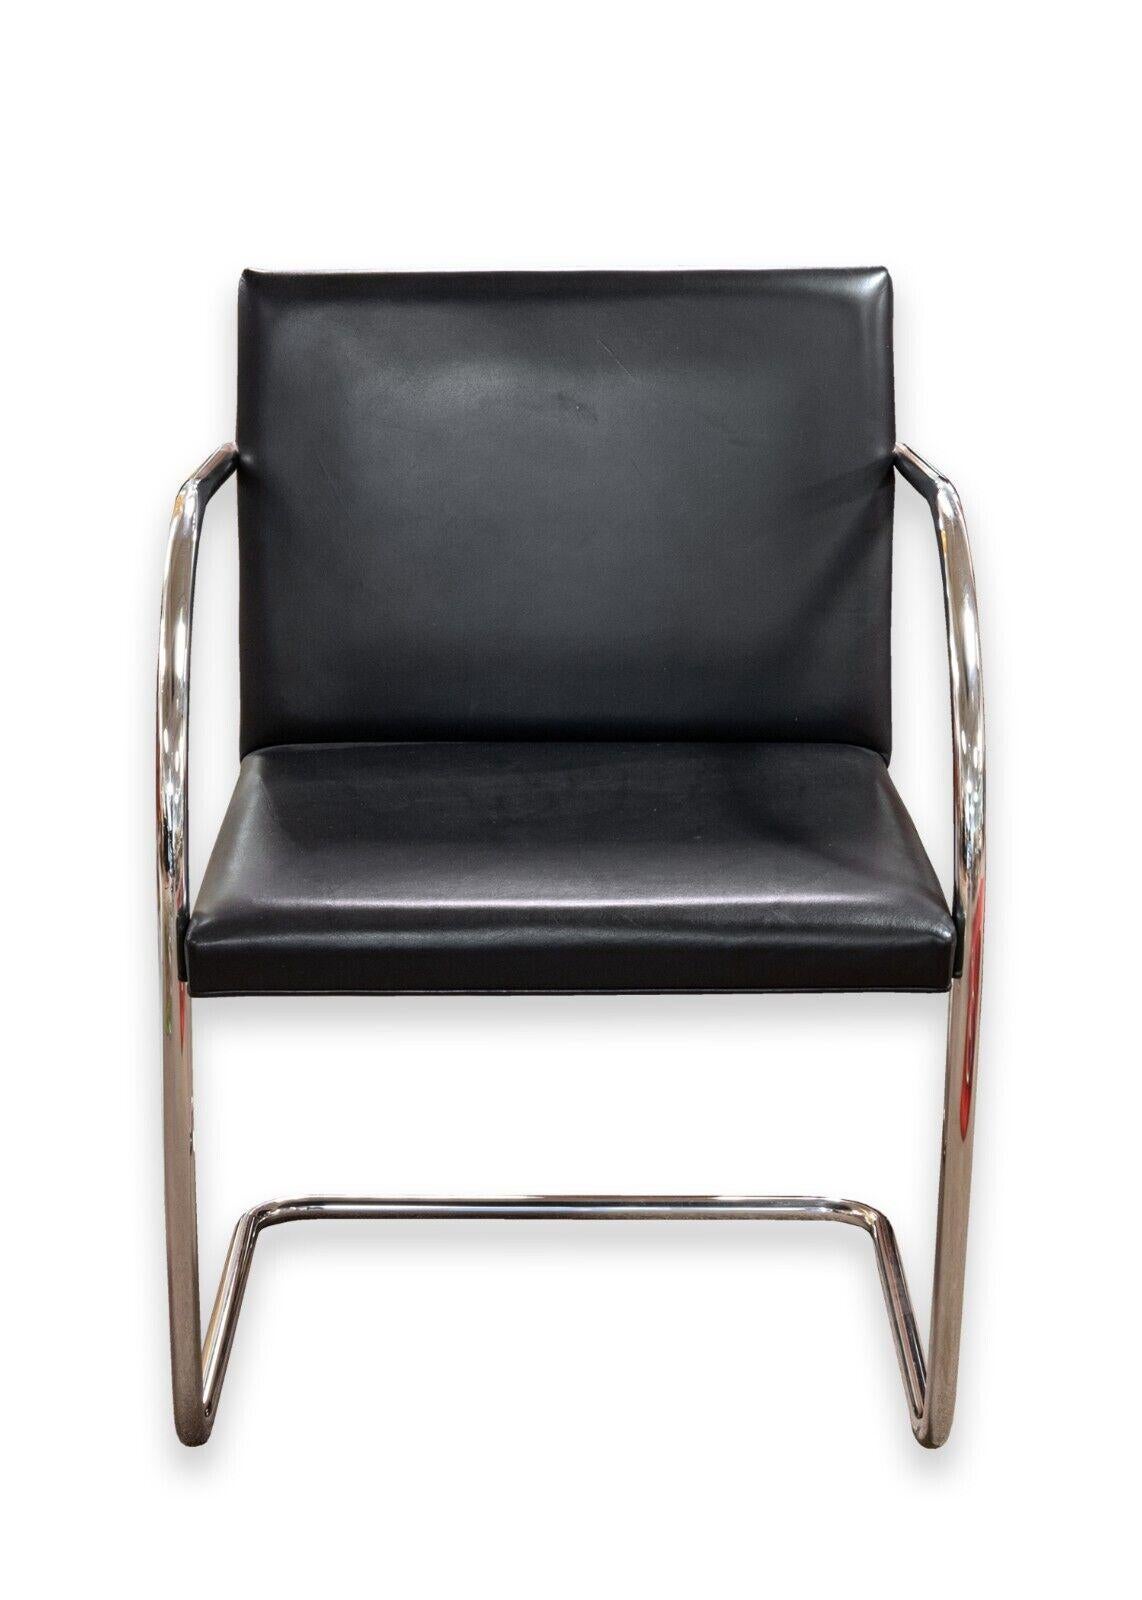 Mid-Century Modern Set of 4 Mies van der Rohe for Knoll Tubular Black Leather Brno MCM Chairs For Sale